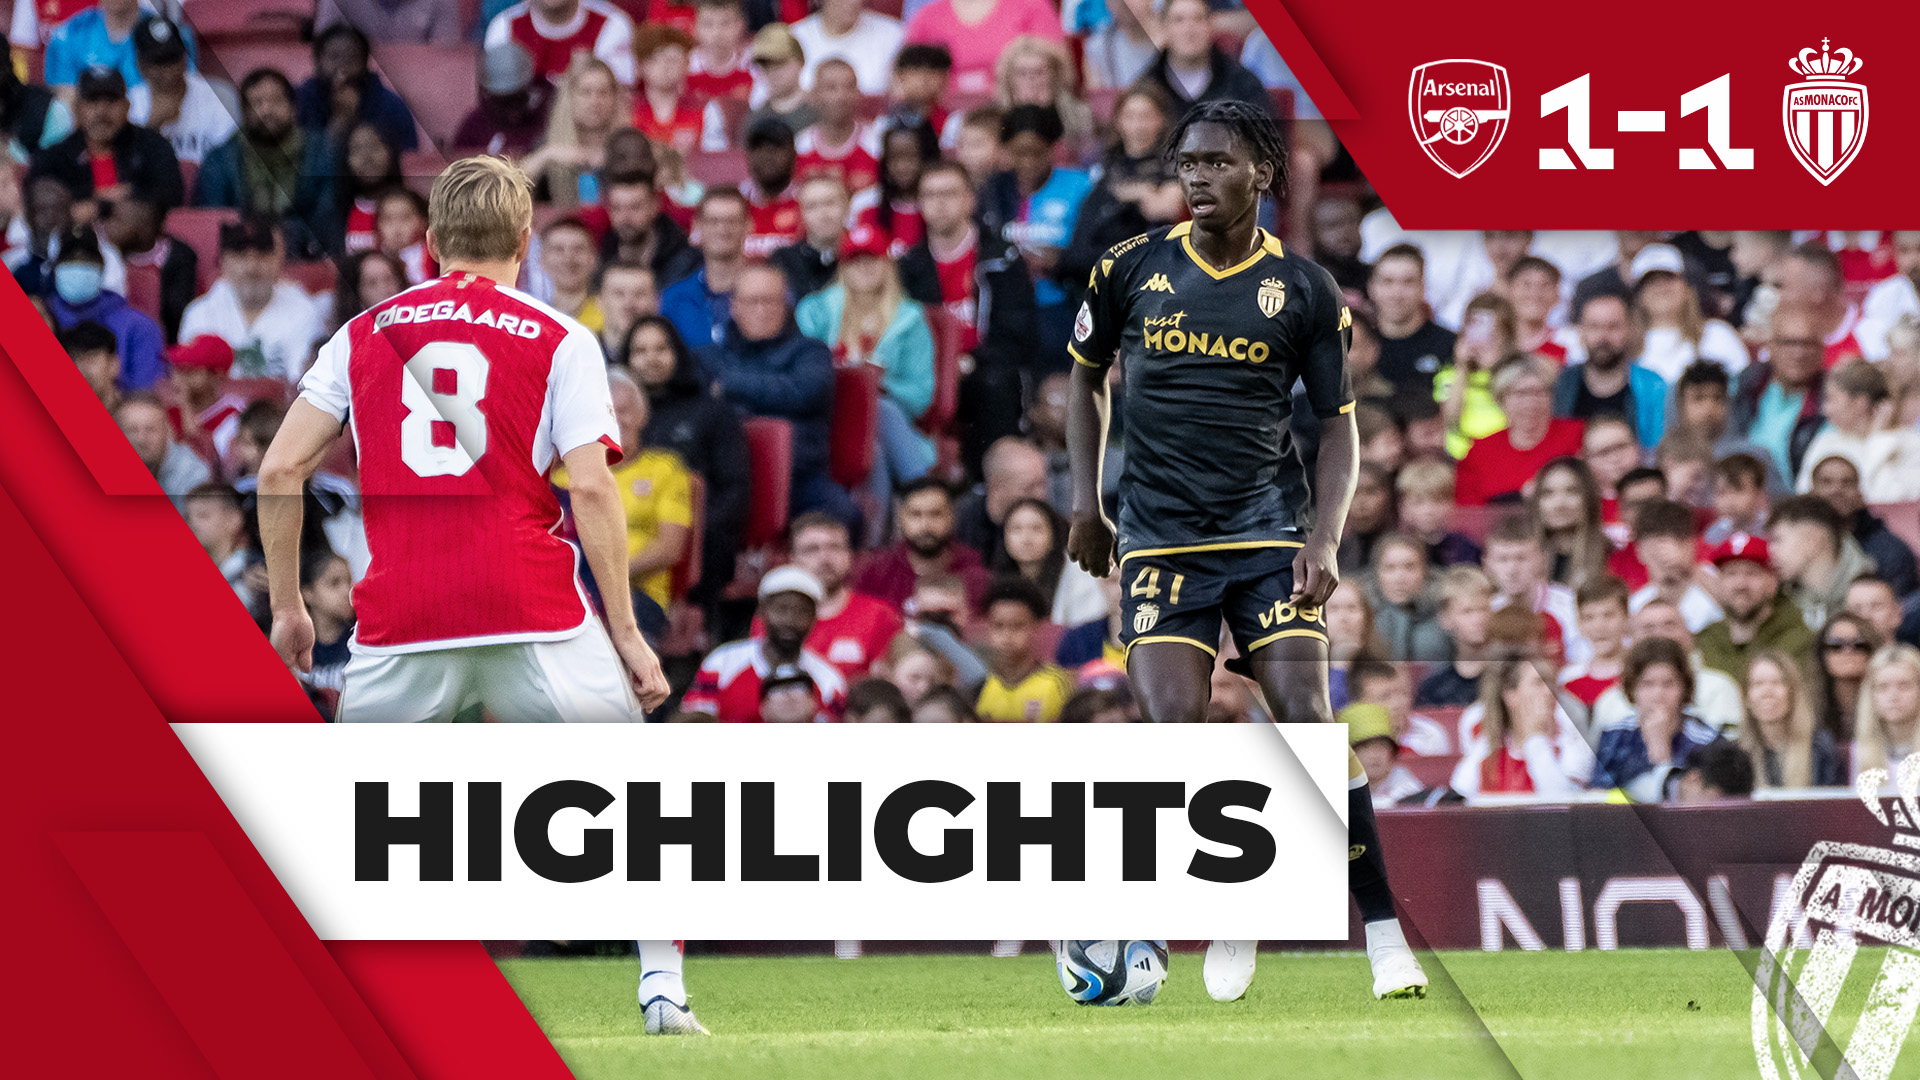 The highlights from the Emirates Cup match against Arsenal